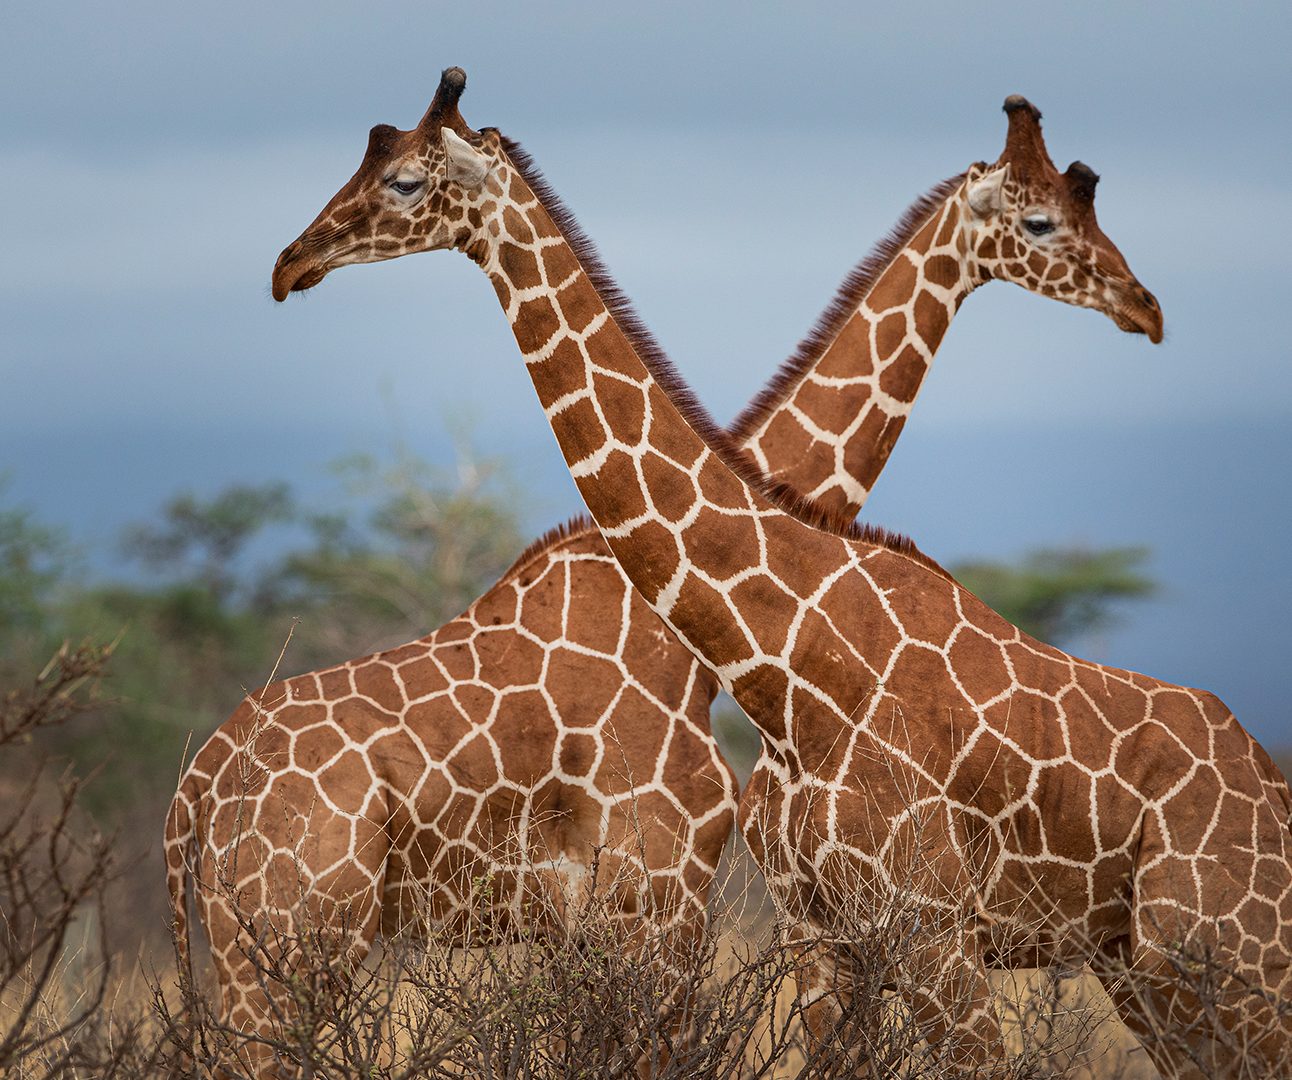 Two giraffes stand facing each other with necks crossing over